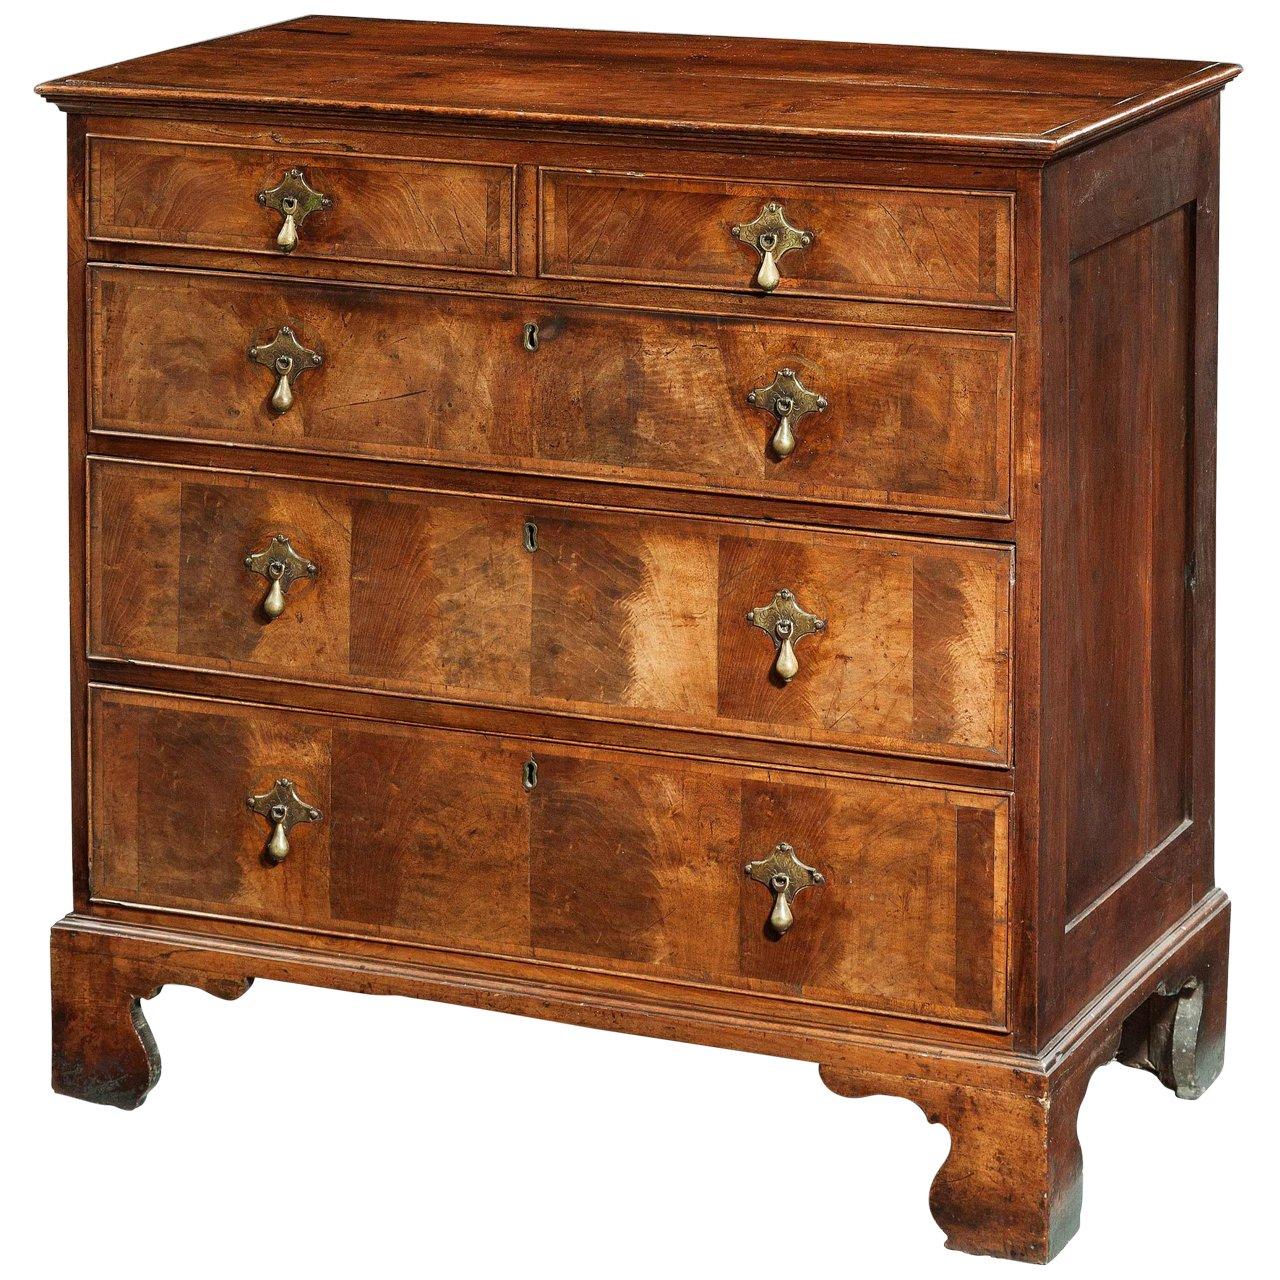 Mid 18th Century Walnut Chest of Drawers with Pear Drop Handles